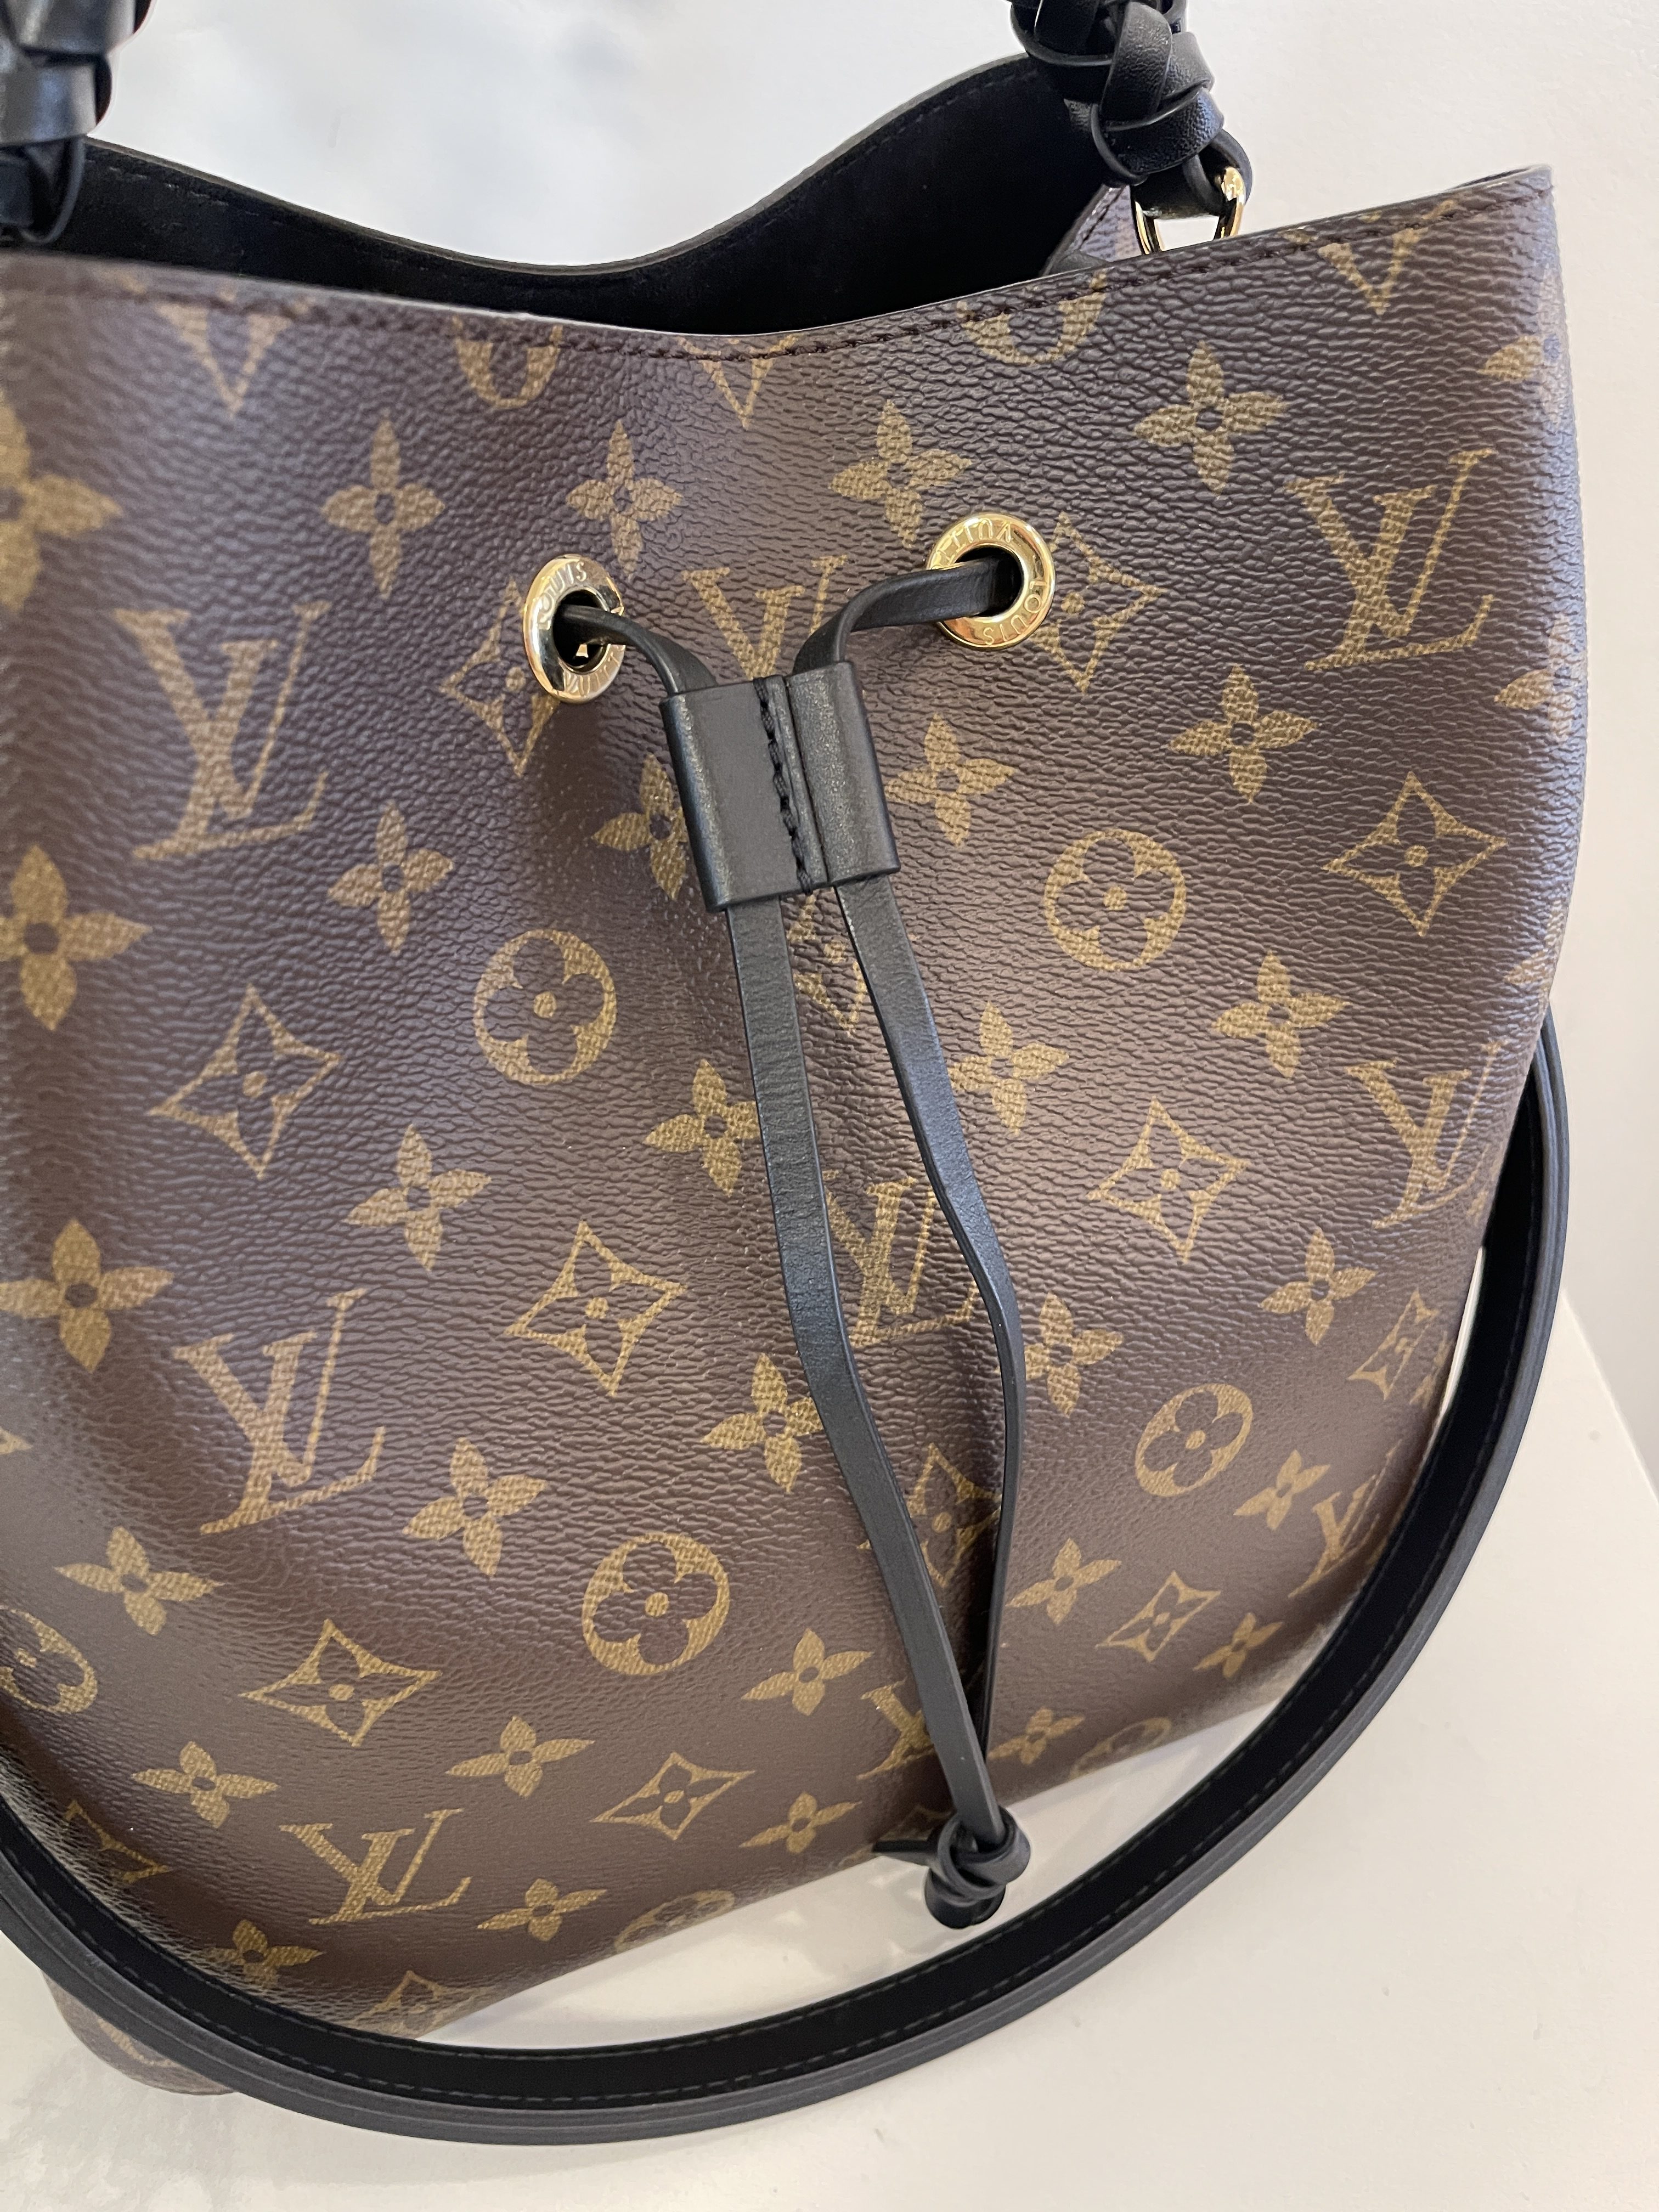 HER Authentic - Brand New Louis Vuitton Monogram Neo Noe Noir. Comes with  the dust bag, & strap. $1,675. DM for pictures & an invoice.